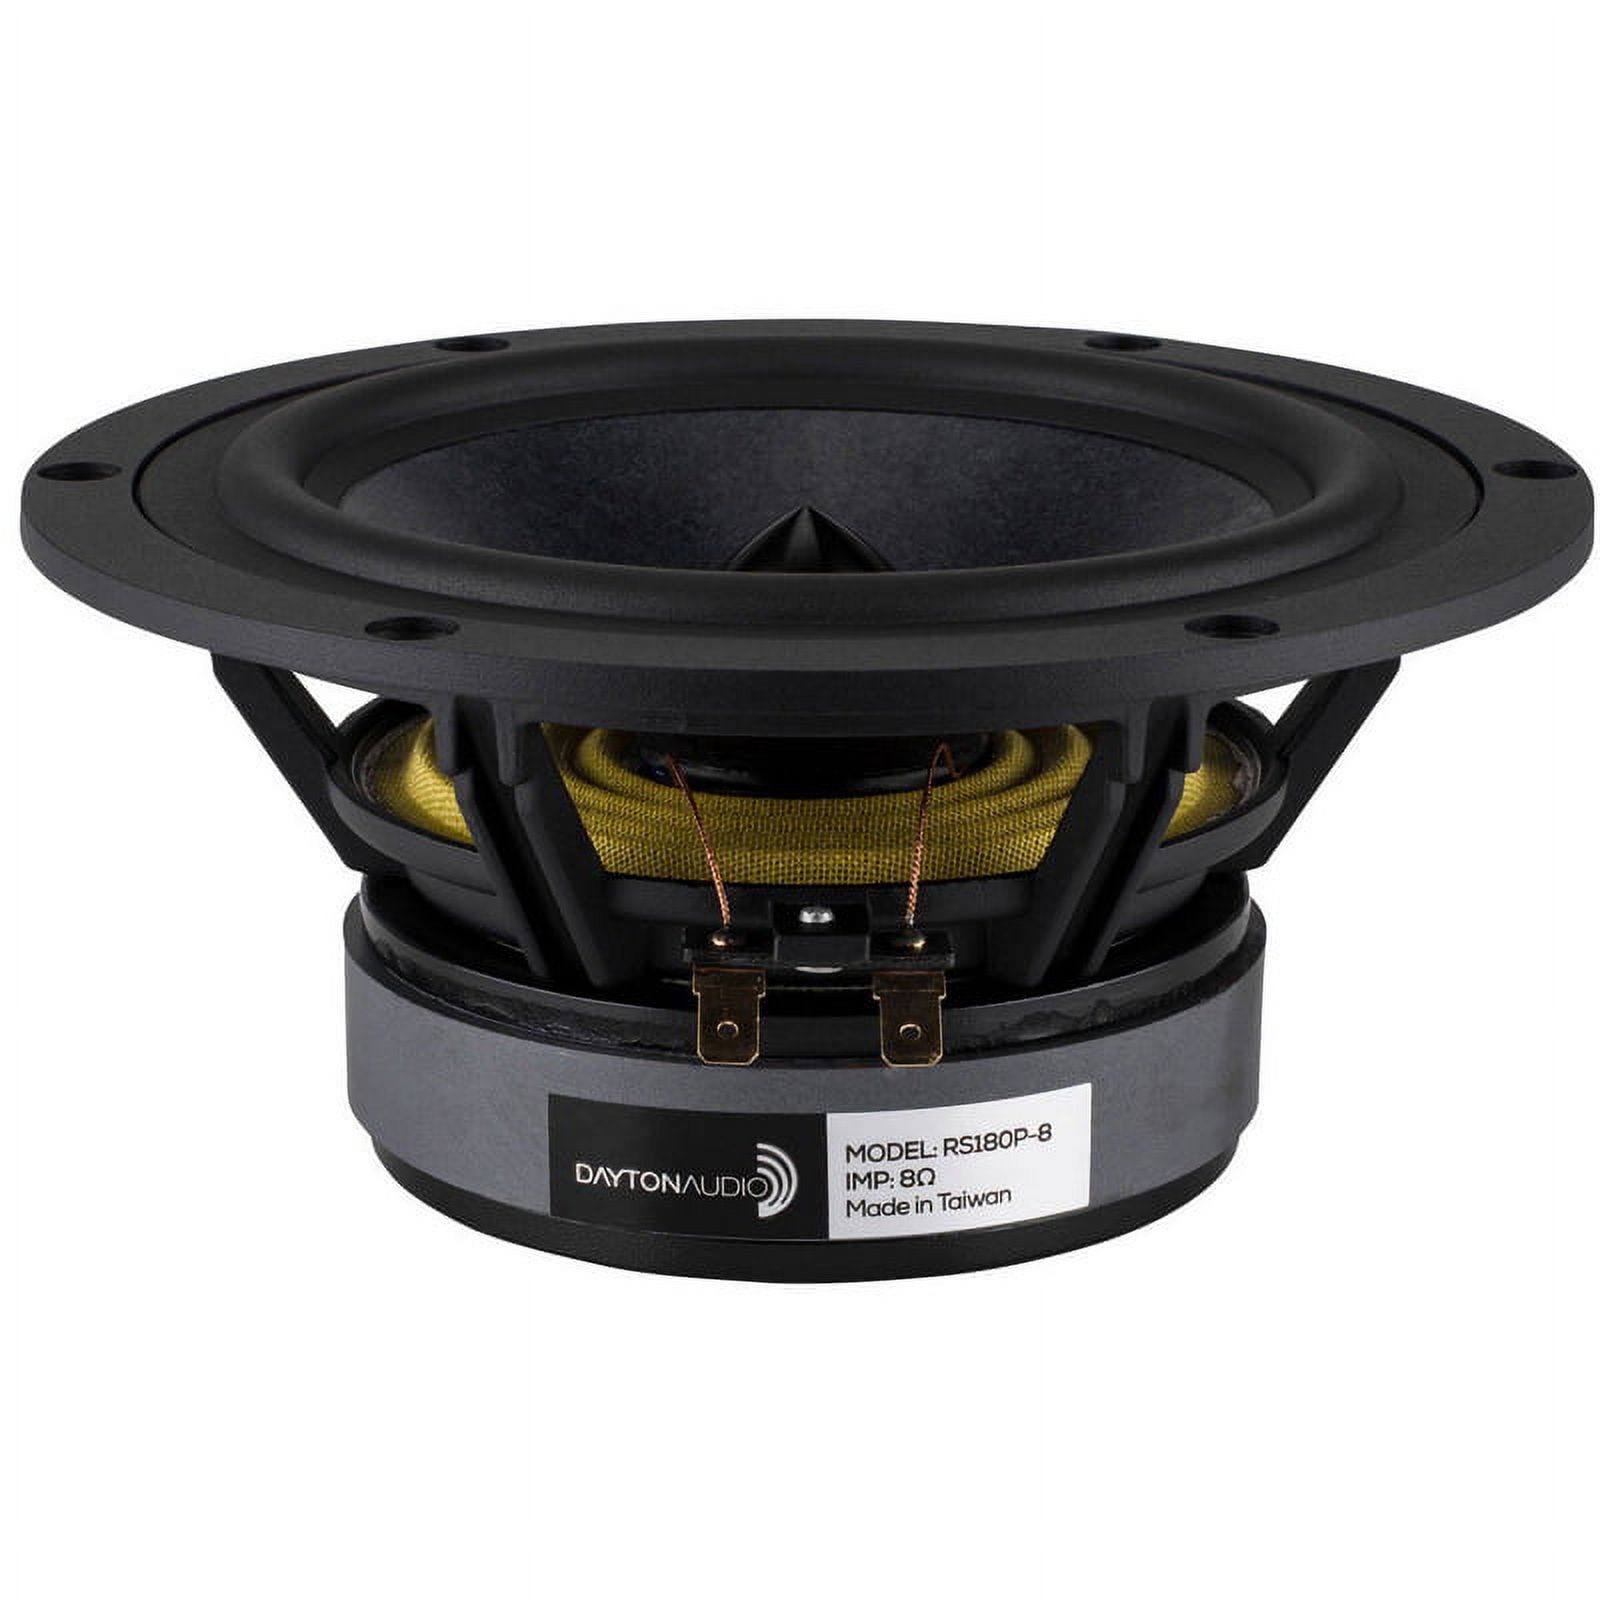 Dayton Audio RS180P-8 7" Reference Paper Woofer 8 Ohm - image 1 of 3